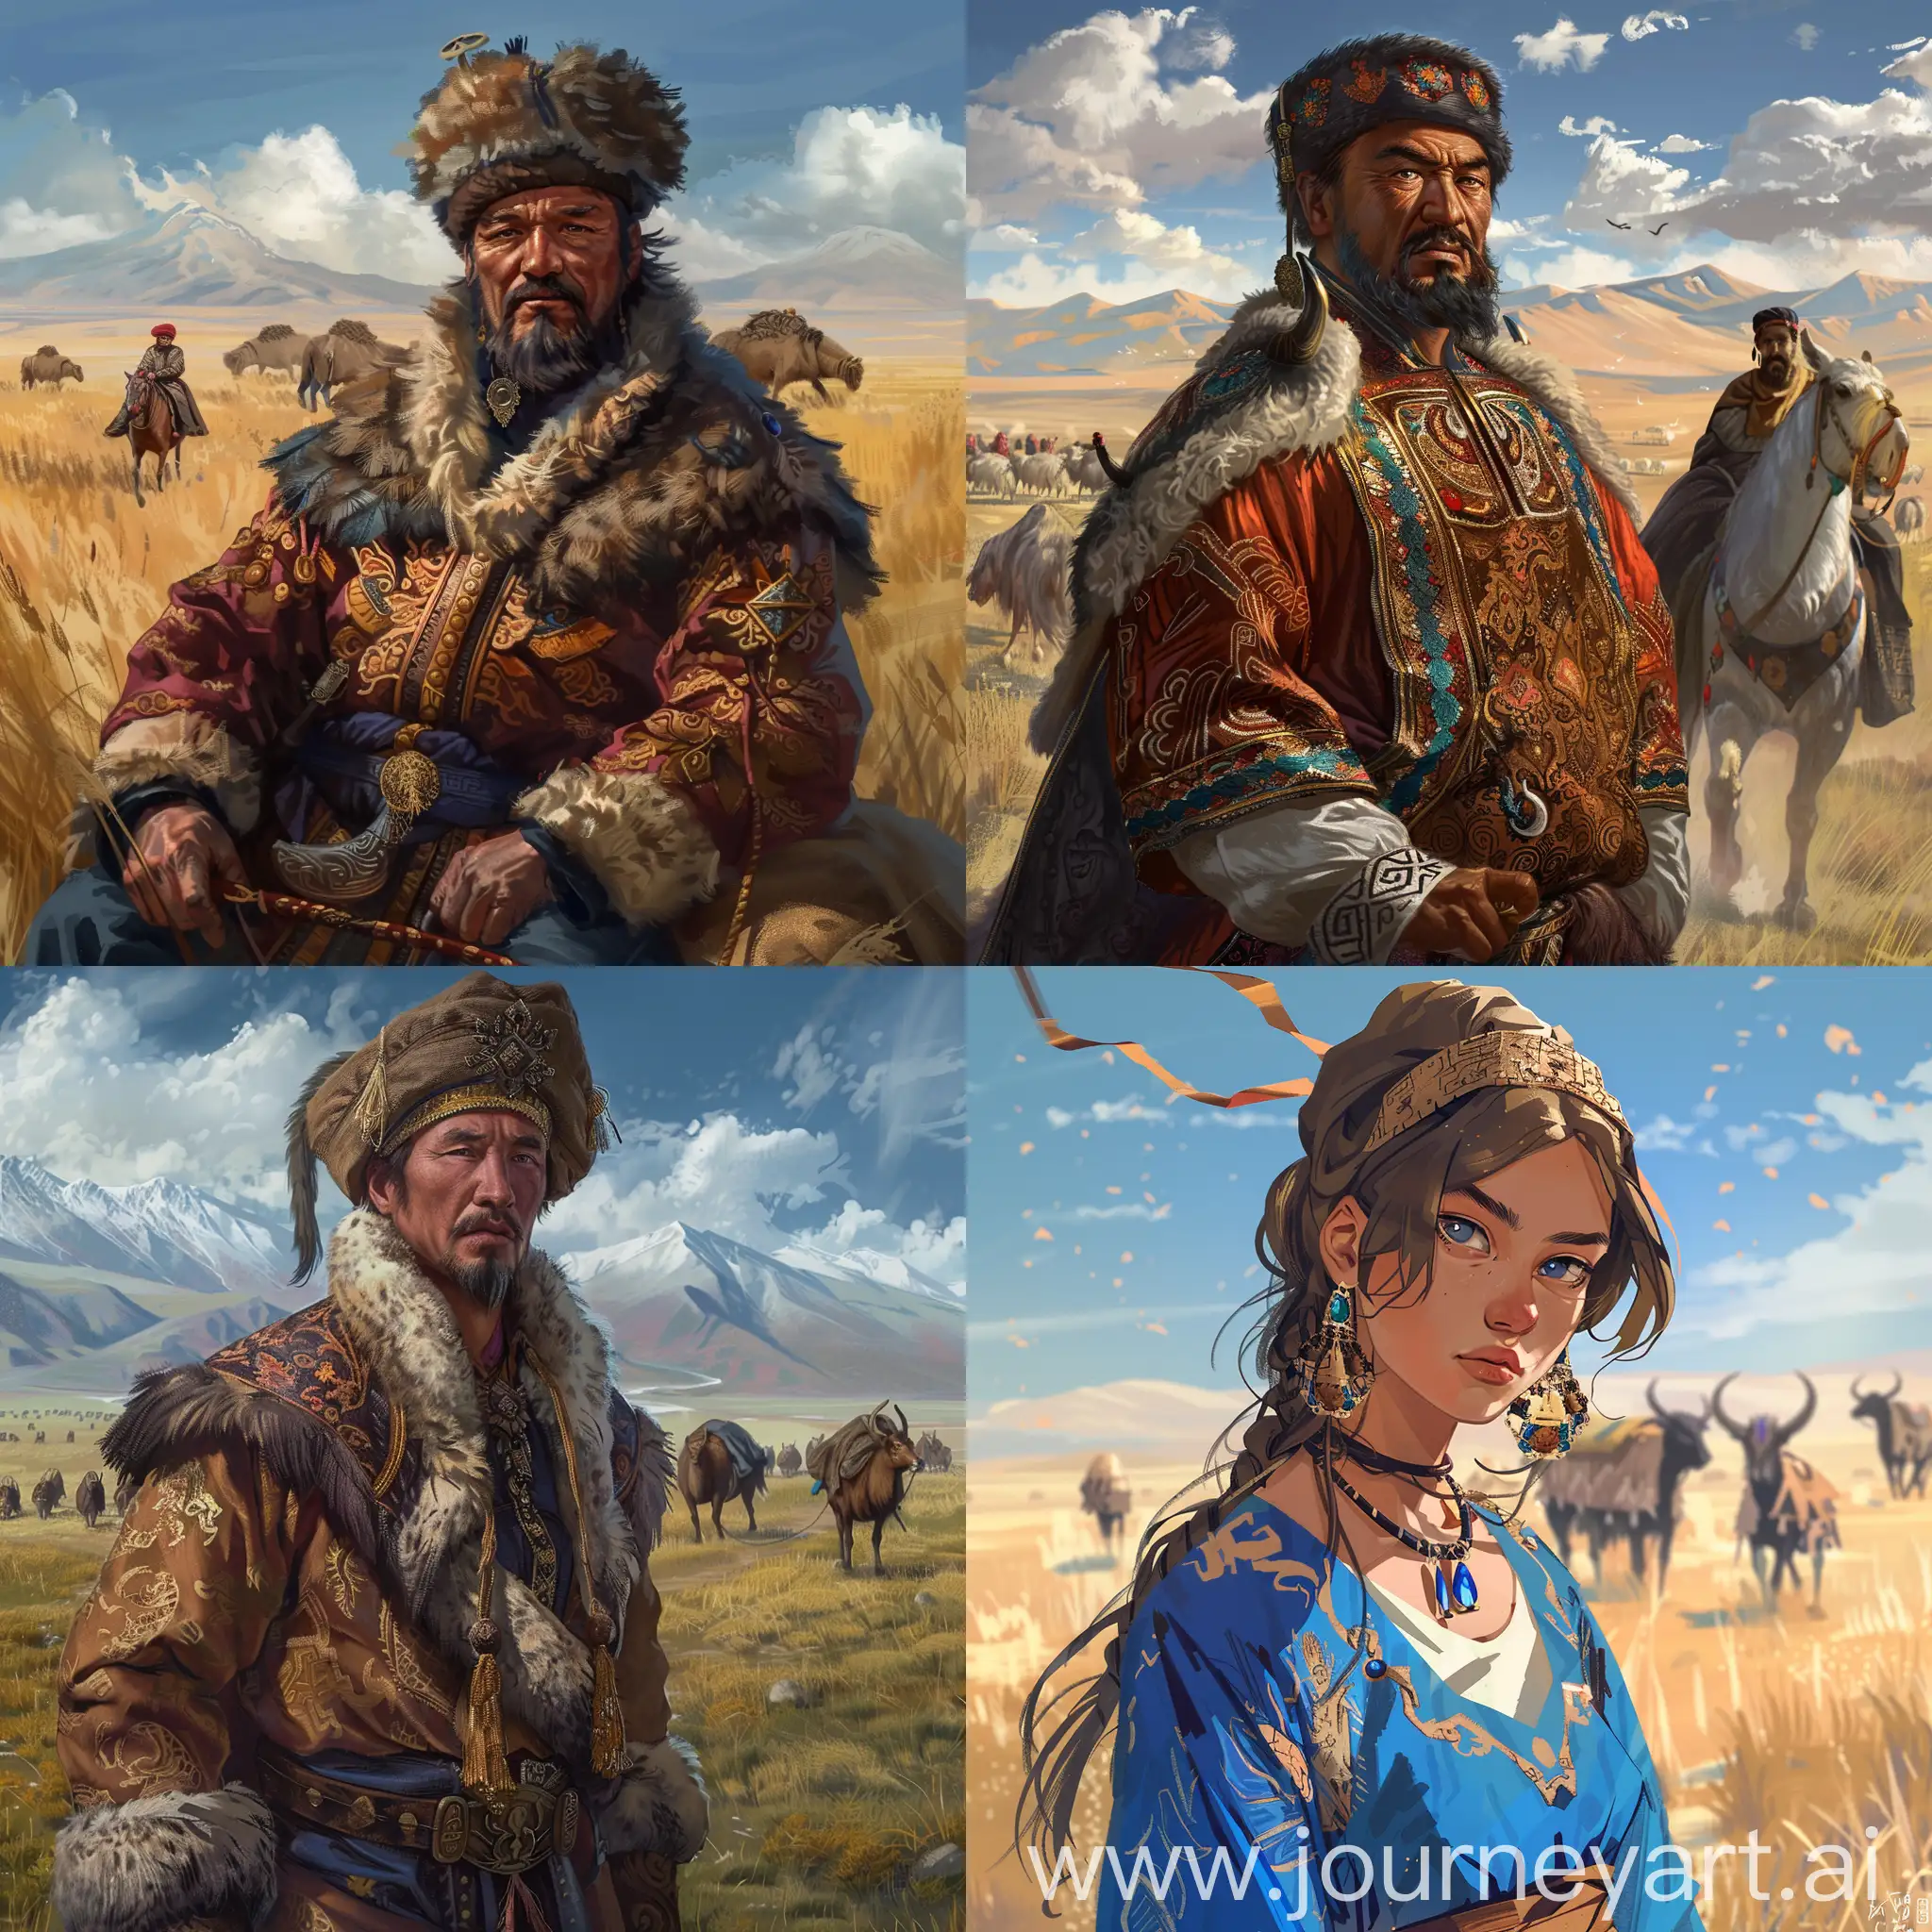 Kazakh nomads are roaming in the background and in the foreground is our kazakh character, now in Kazakh costume something national, digital art